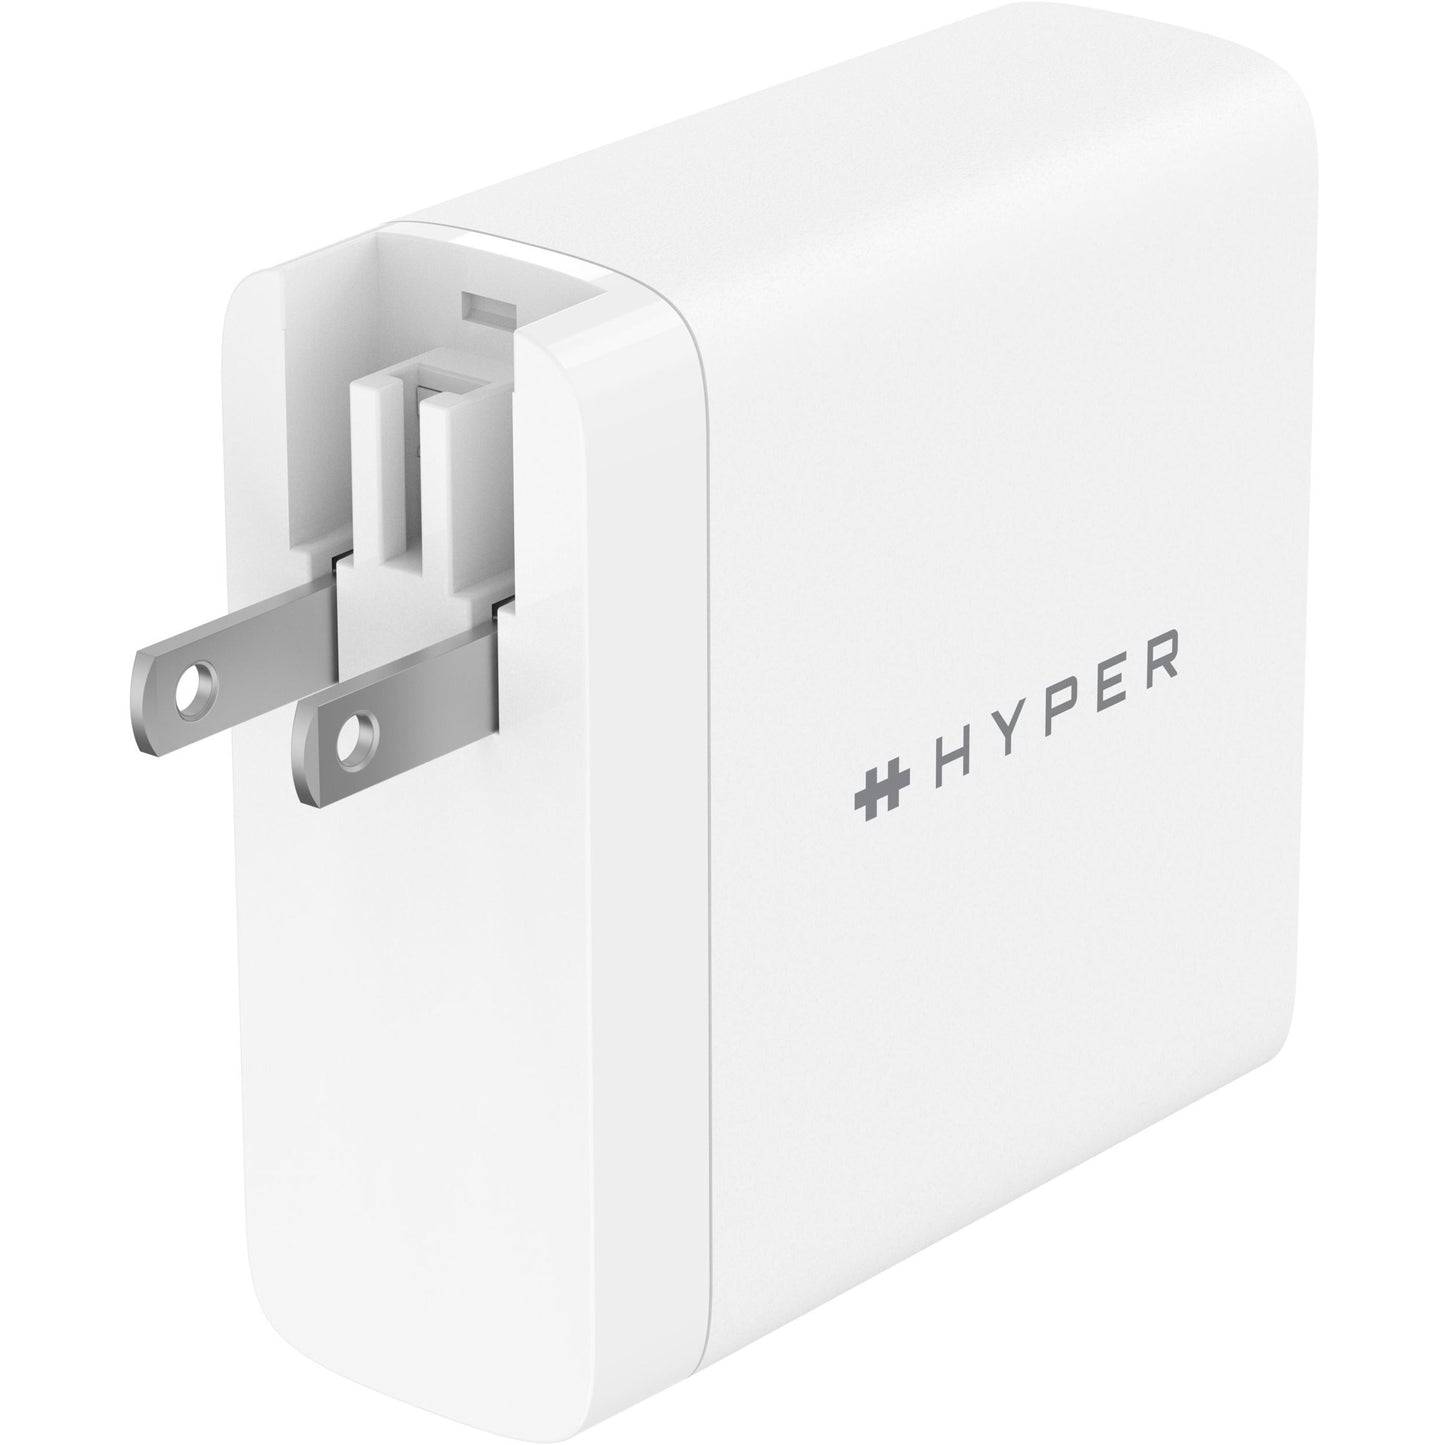 Hyper HyperJuice 140W PD 3.1 USB-C Charger (Includes 2m USB-C Cable)